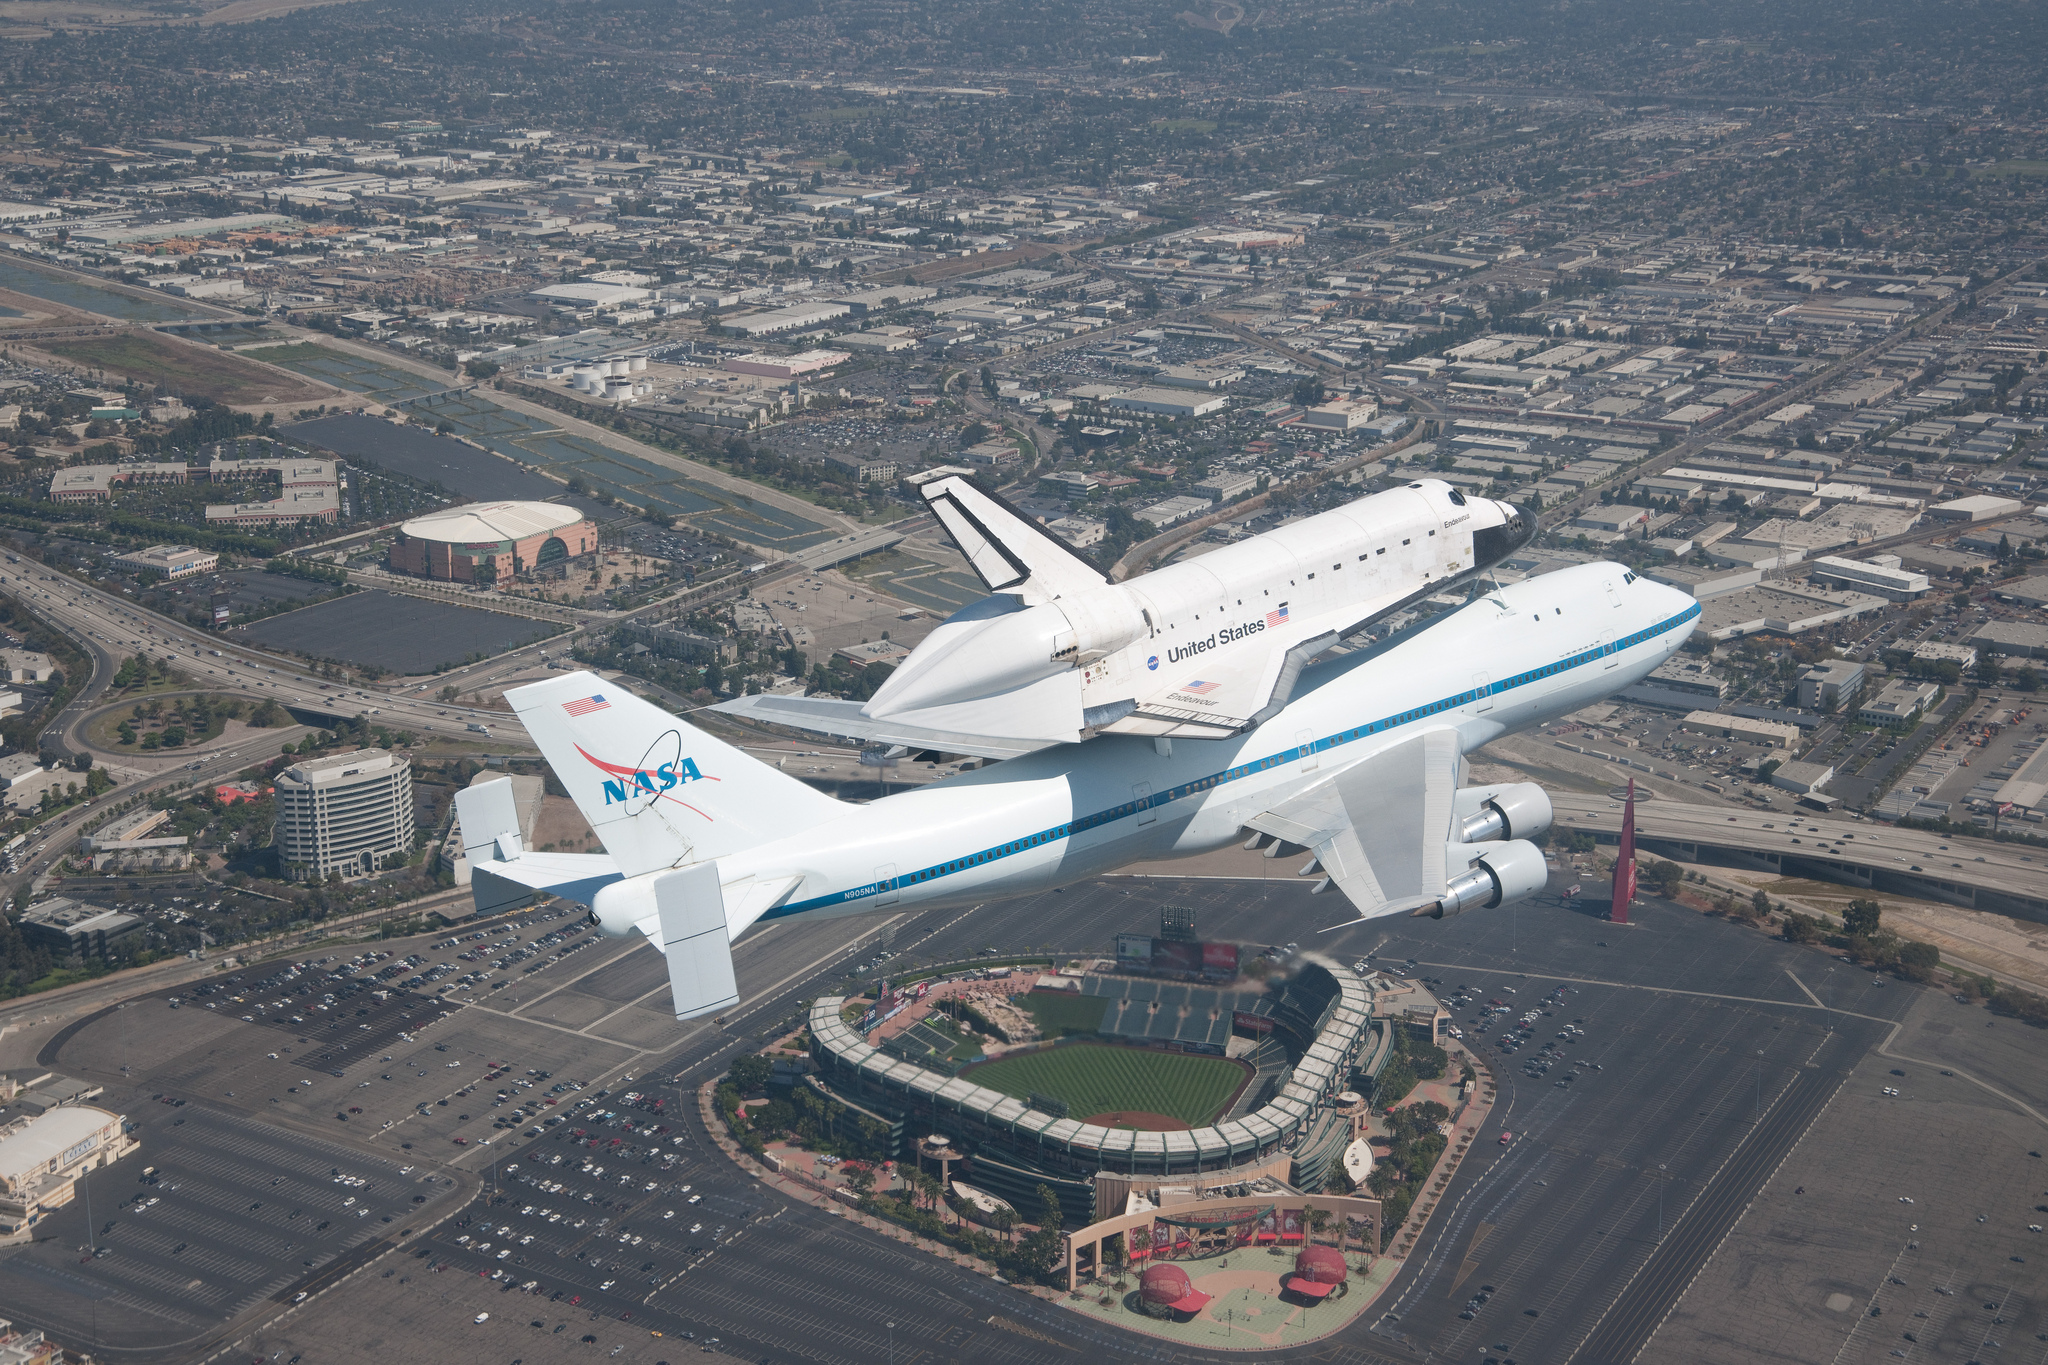 vehicles, space shuttle endeavour, airplane, anaheim, nasa, shuttle, space shuttle, stadium, space shuttles